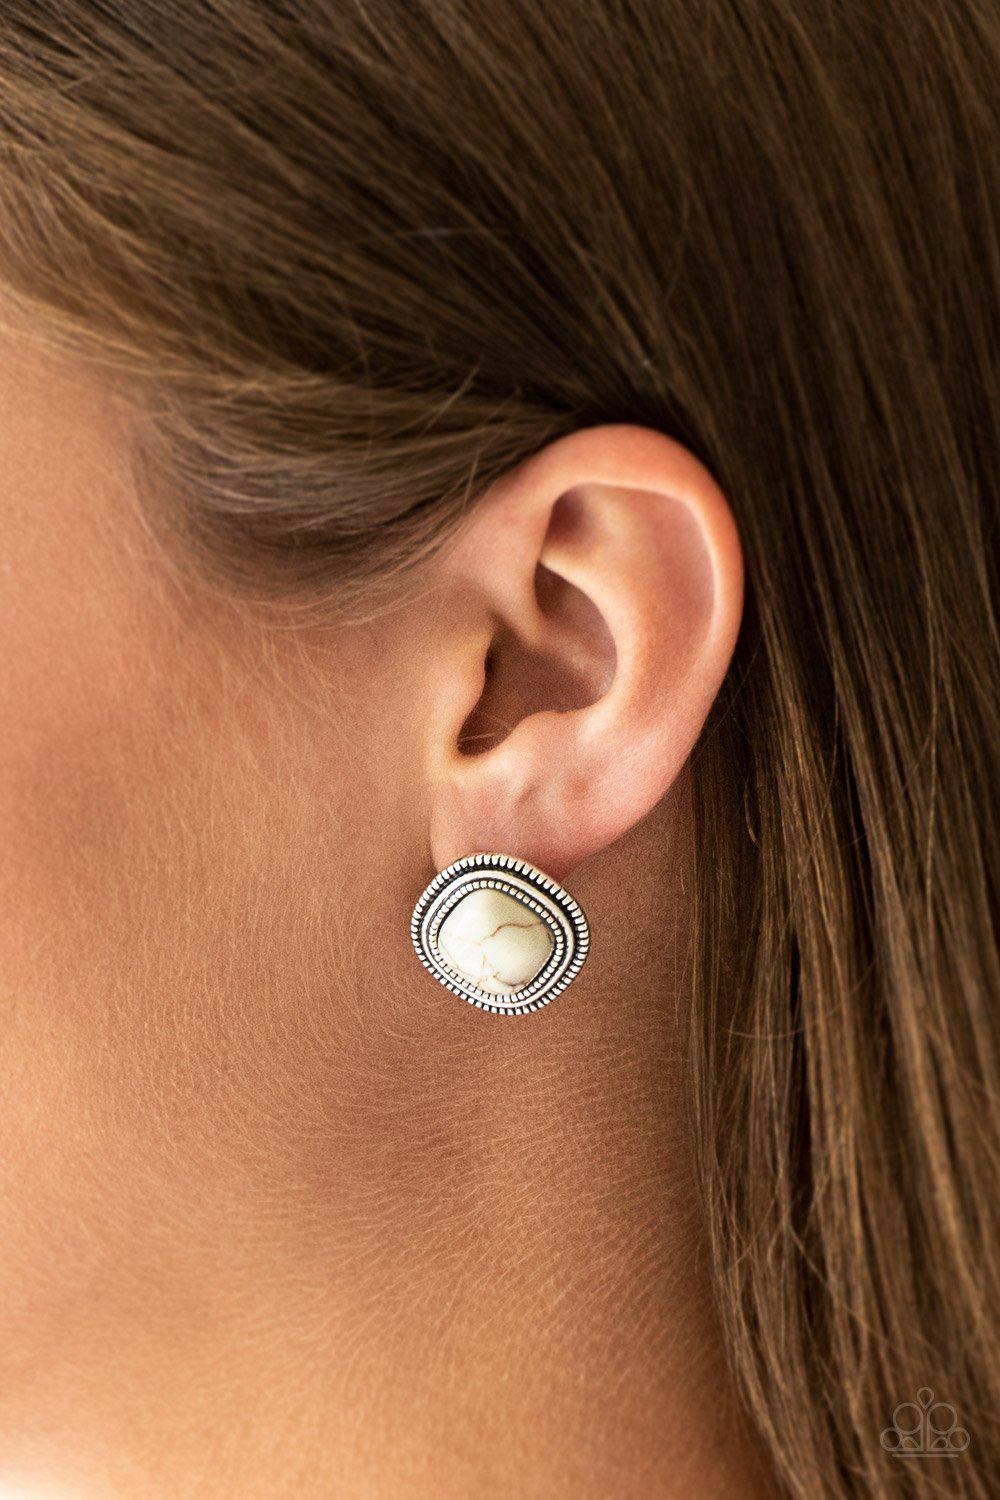 Frontier Runner White Stone Post Earrings - Paparazzi Accessories- model - CarasShop.com - $5 Jewelry by Cara Jewels